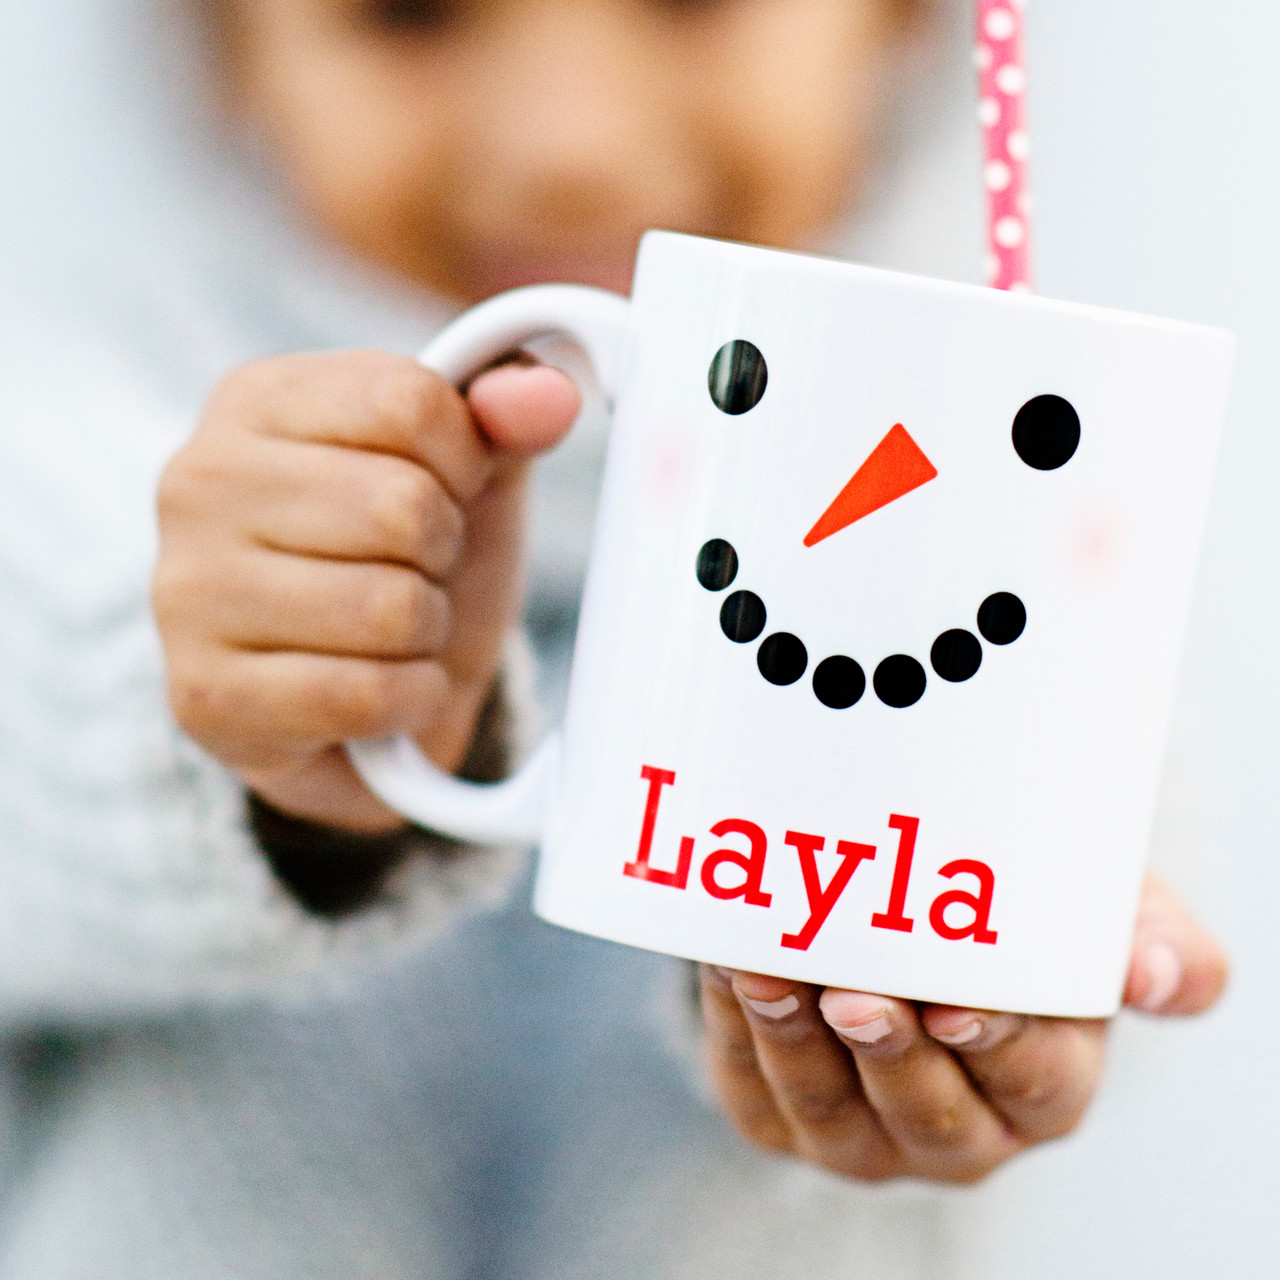 https://cdn11.bigcommerce.com/s-5grzuu6/images/stencil/1280x1280/products/1720/42102/Personalized_Holiday_Snowman_Christmas_Mug___69670.1671904806.jpg?c=2